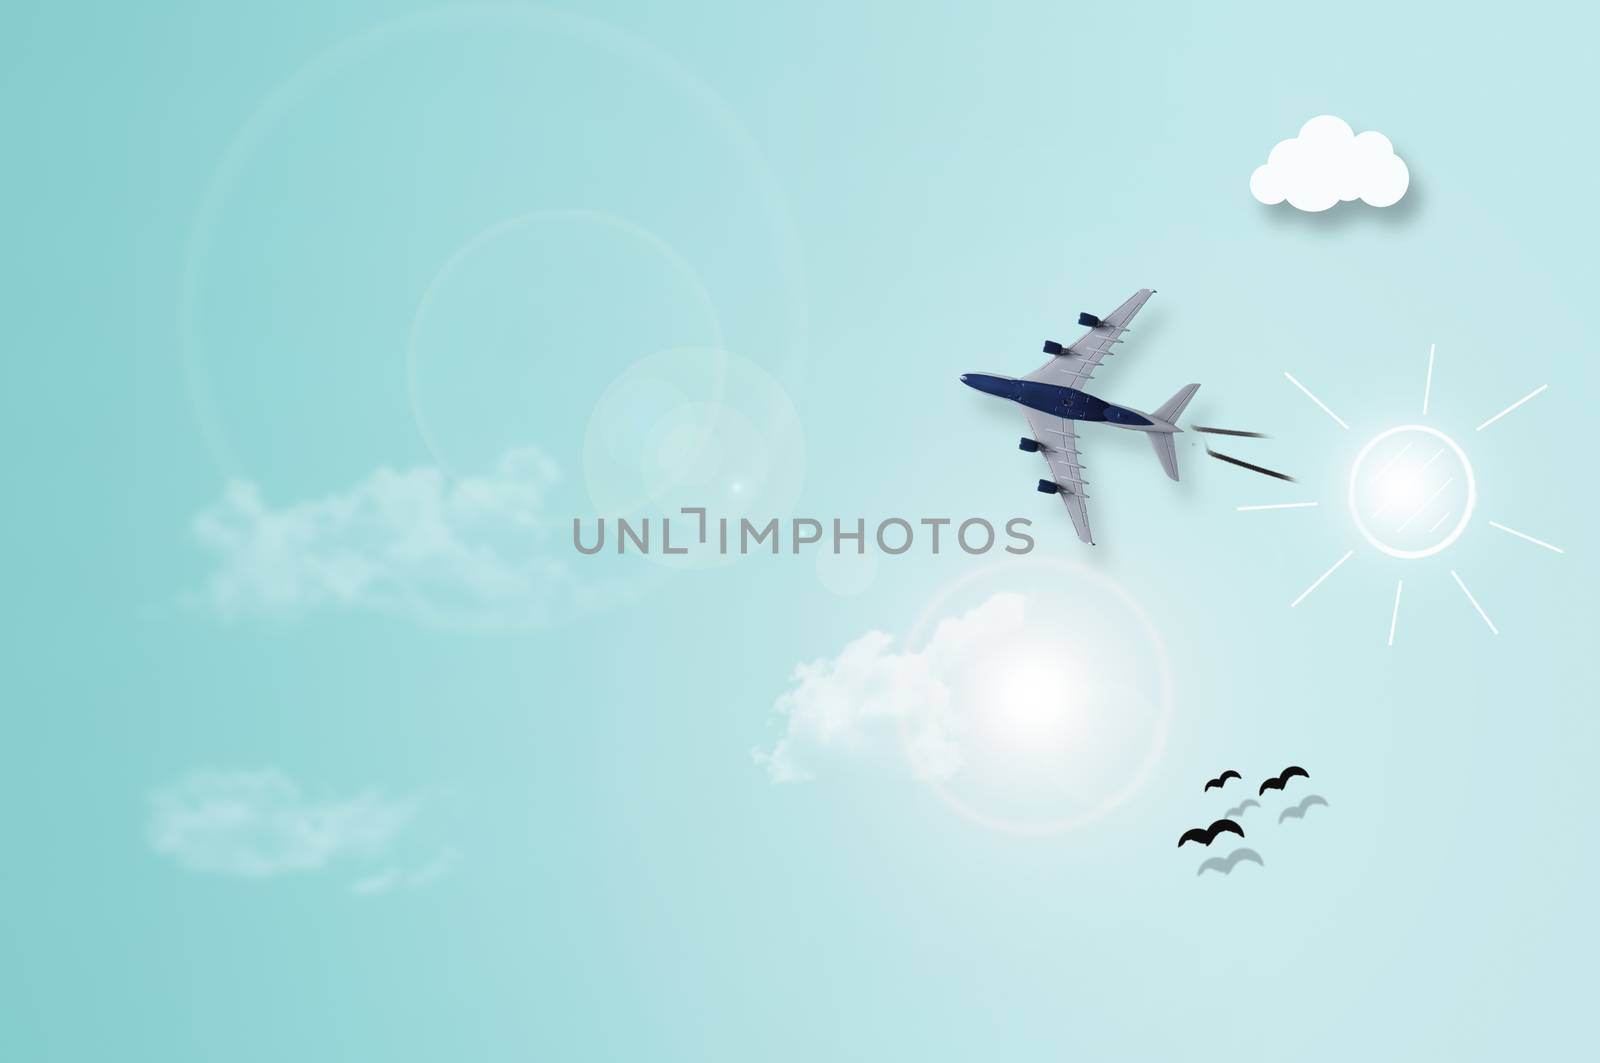 Miniature plane on sky paper background with illustration of sun, clouds and birds 